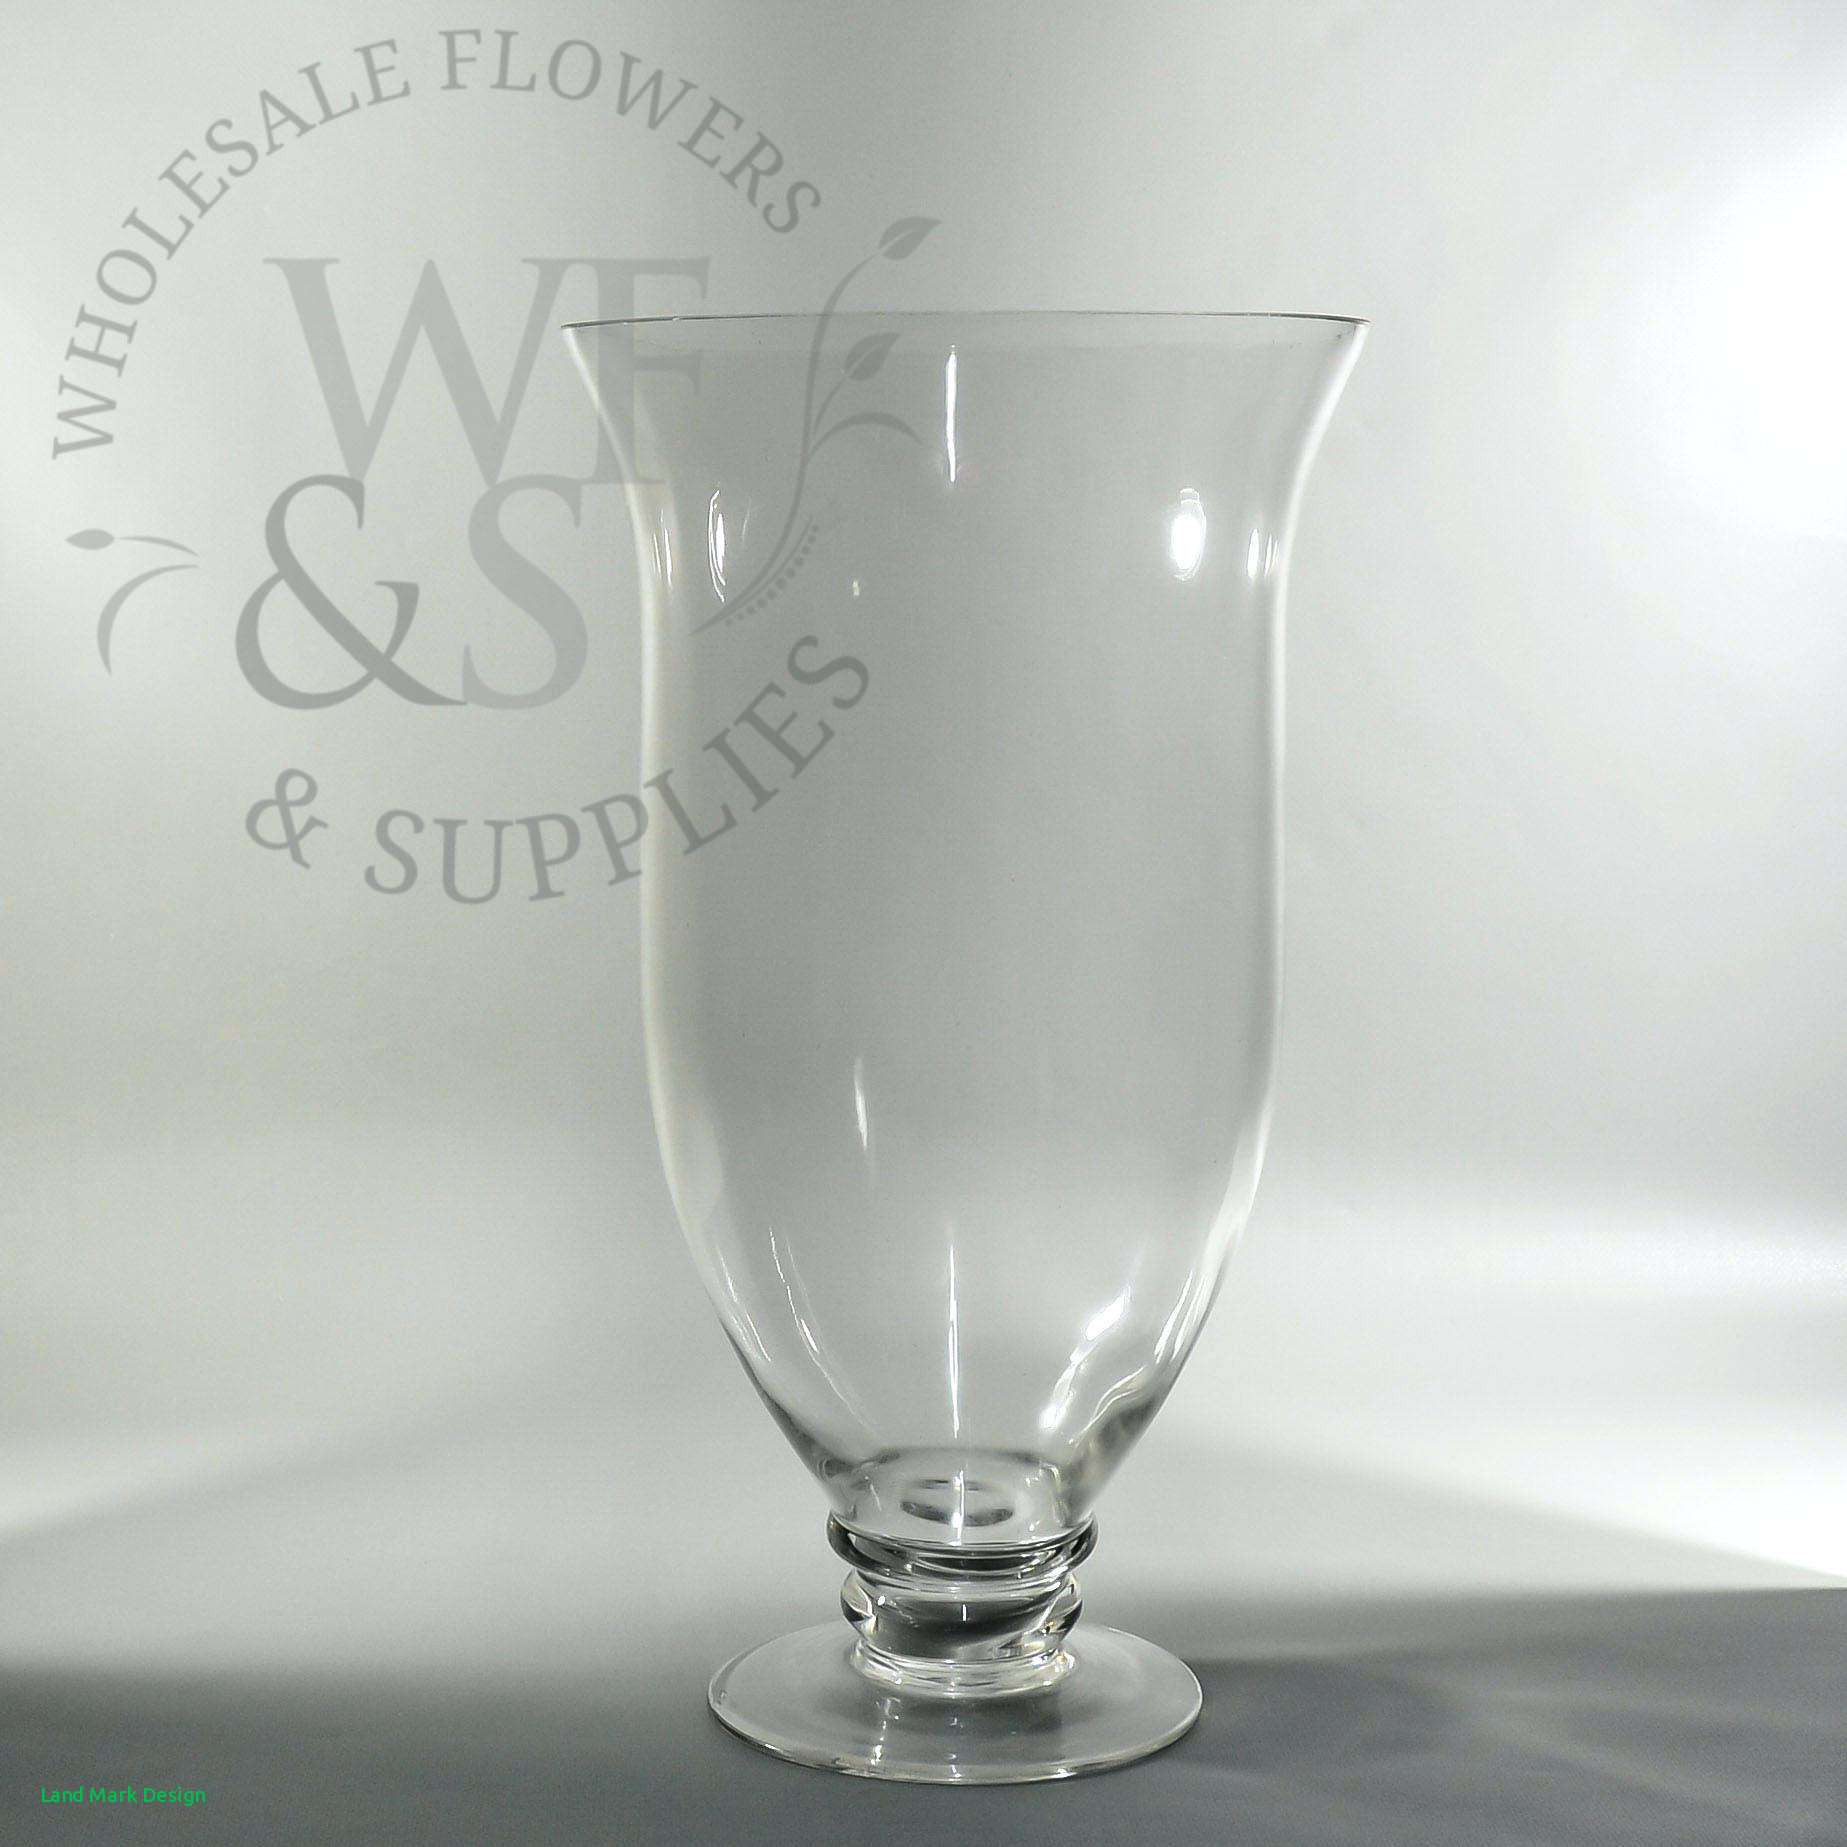 29 Cute Waterford Vase Patterns 2024 free download waterford vase patterns of large crystal vase photos glass vase ideas design vases intended for glass vase ideas design